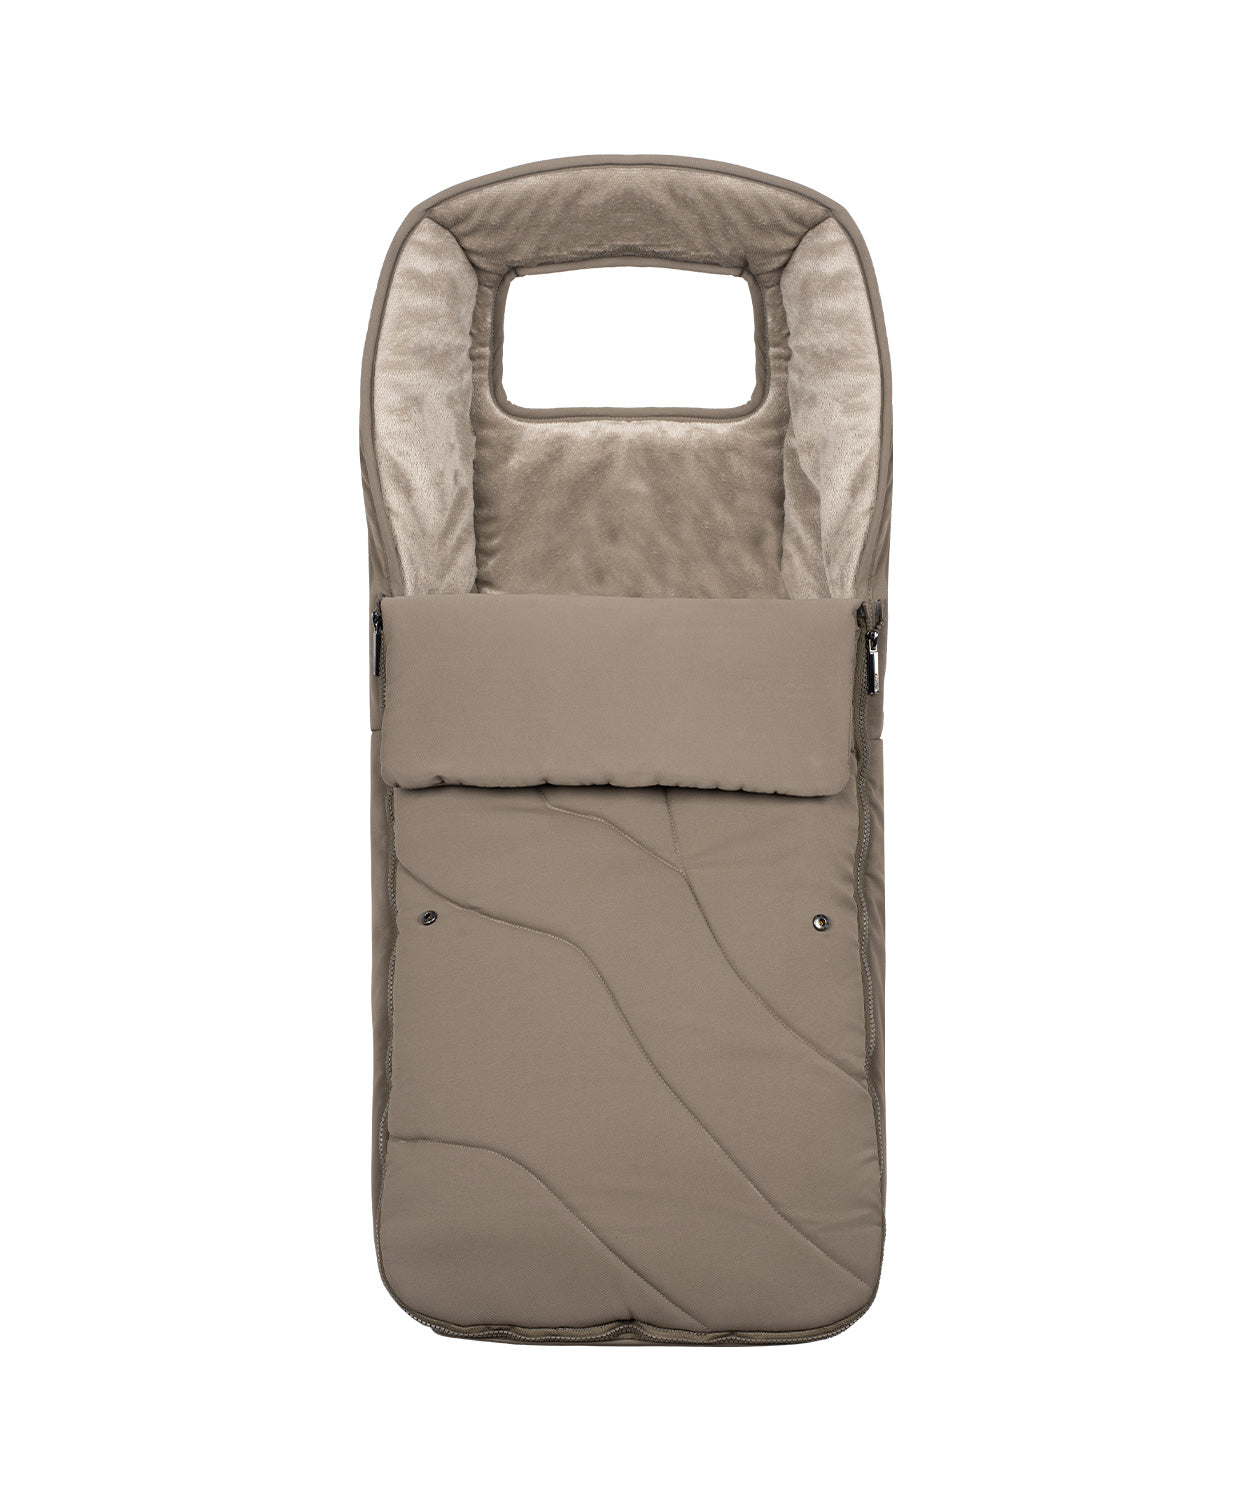 Venicci Tinum Upline SE 3 In 1 Travel System - Powder - For Your Little One